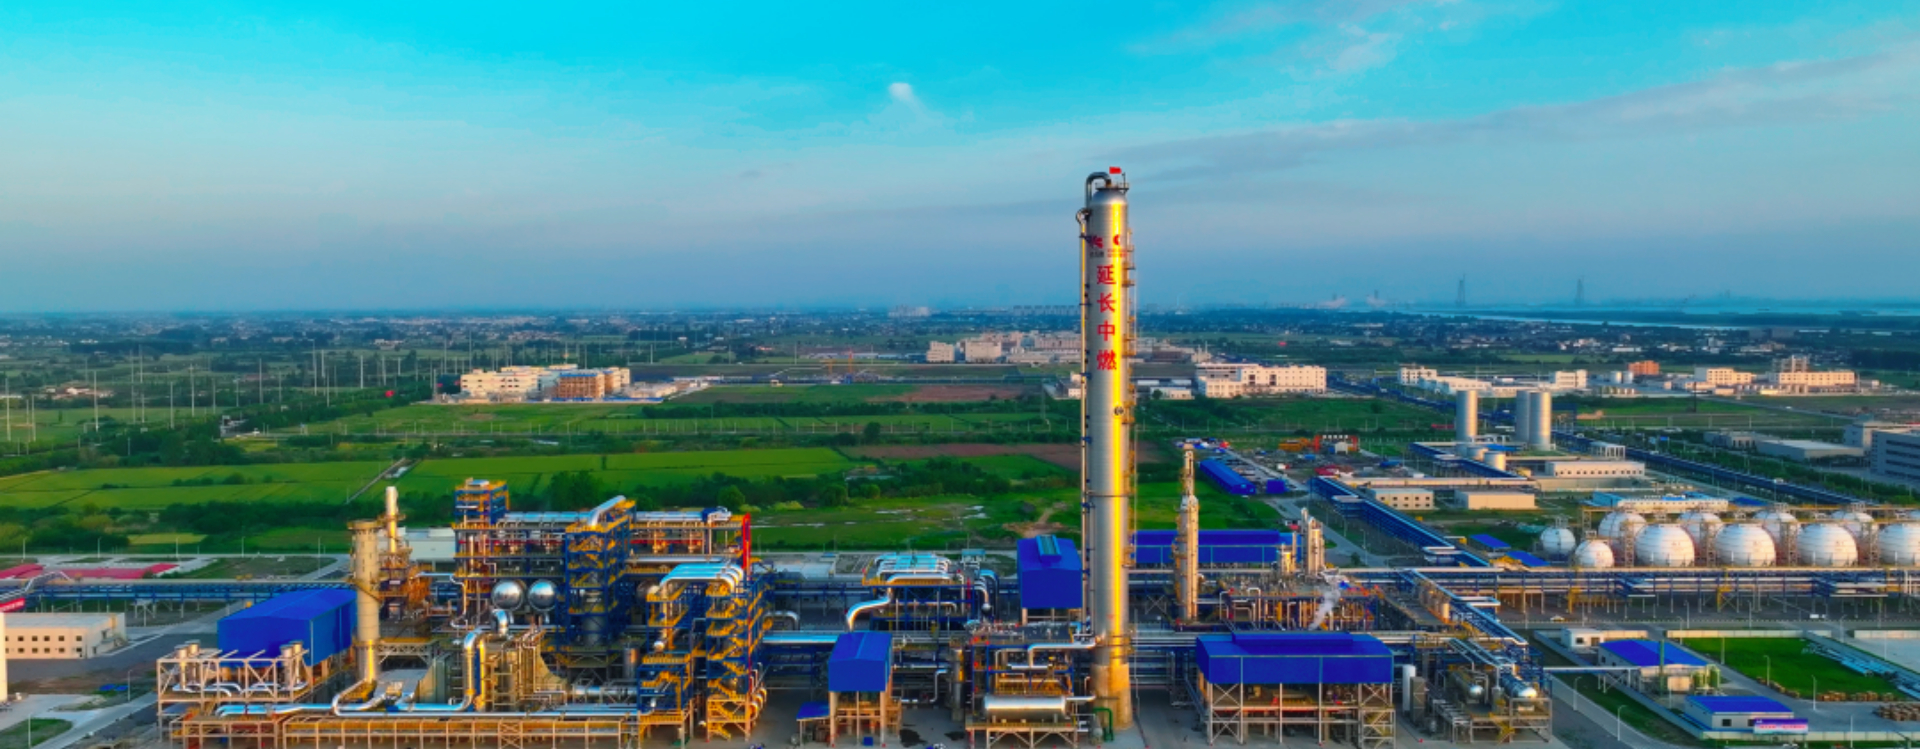 Taixing company makes advances in chemical processing